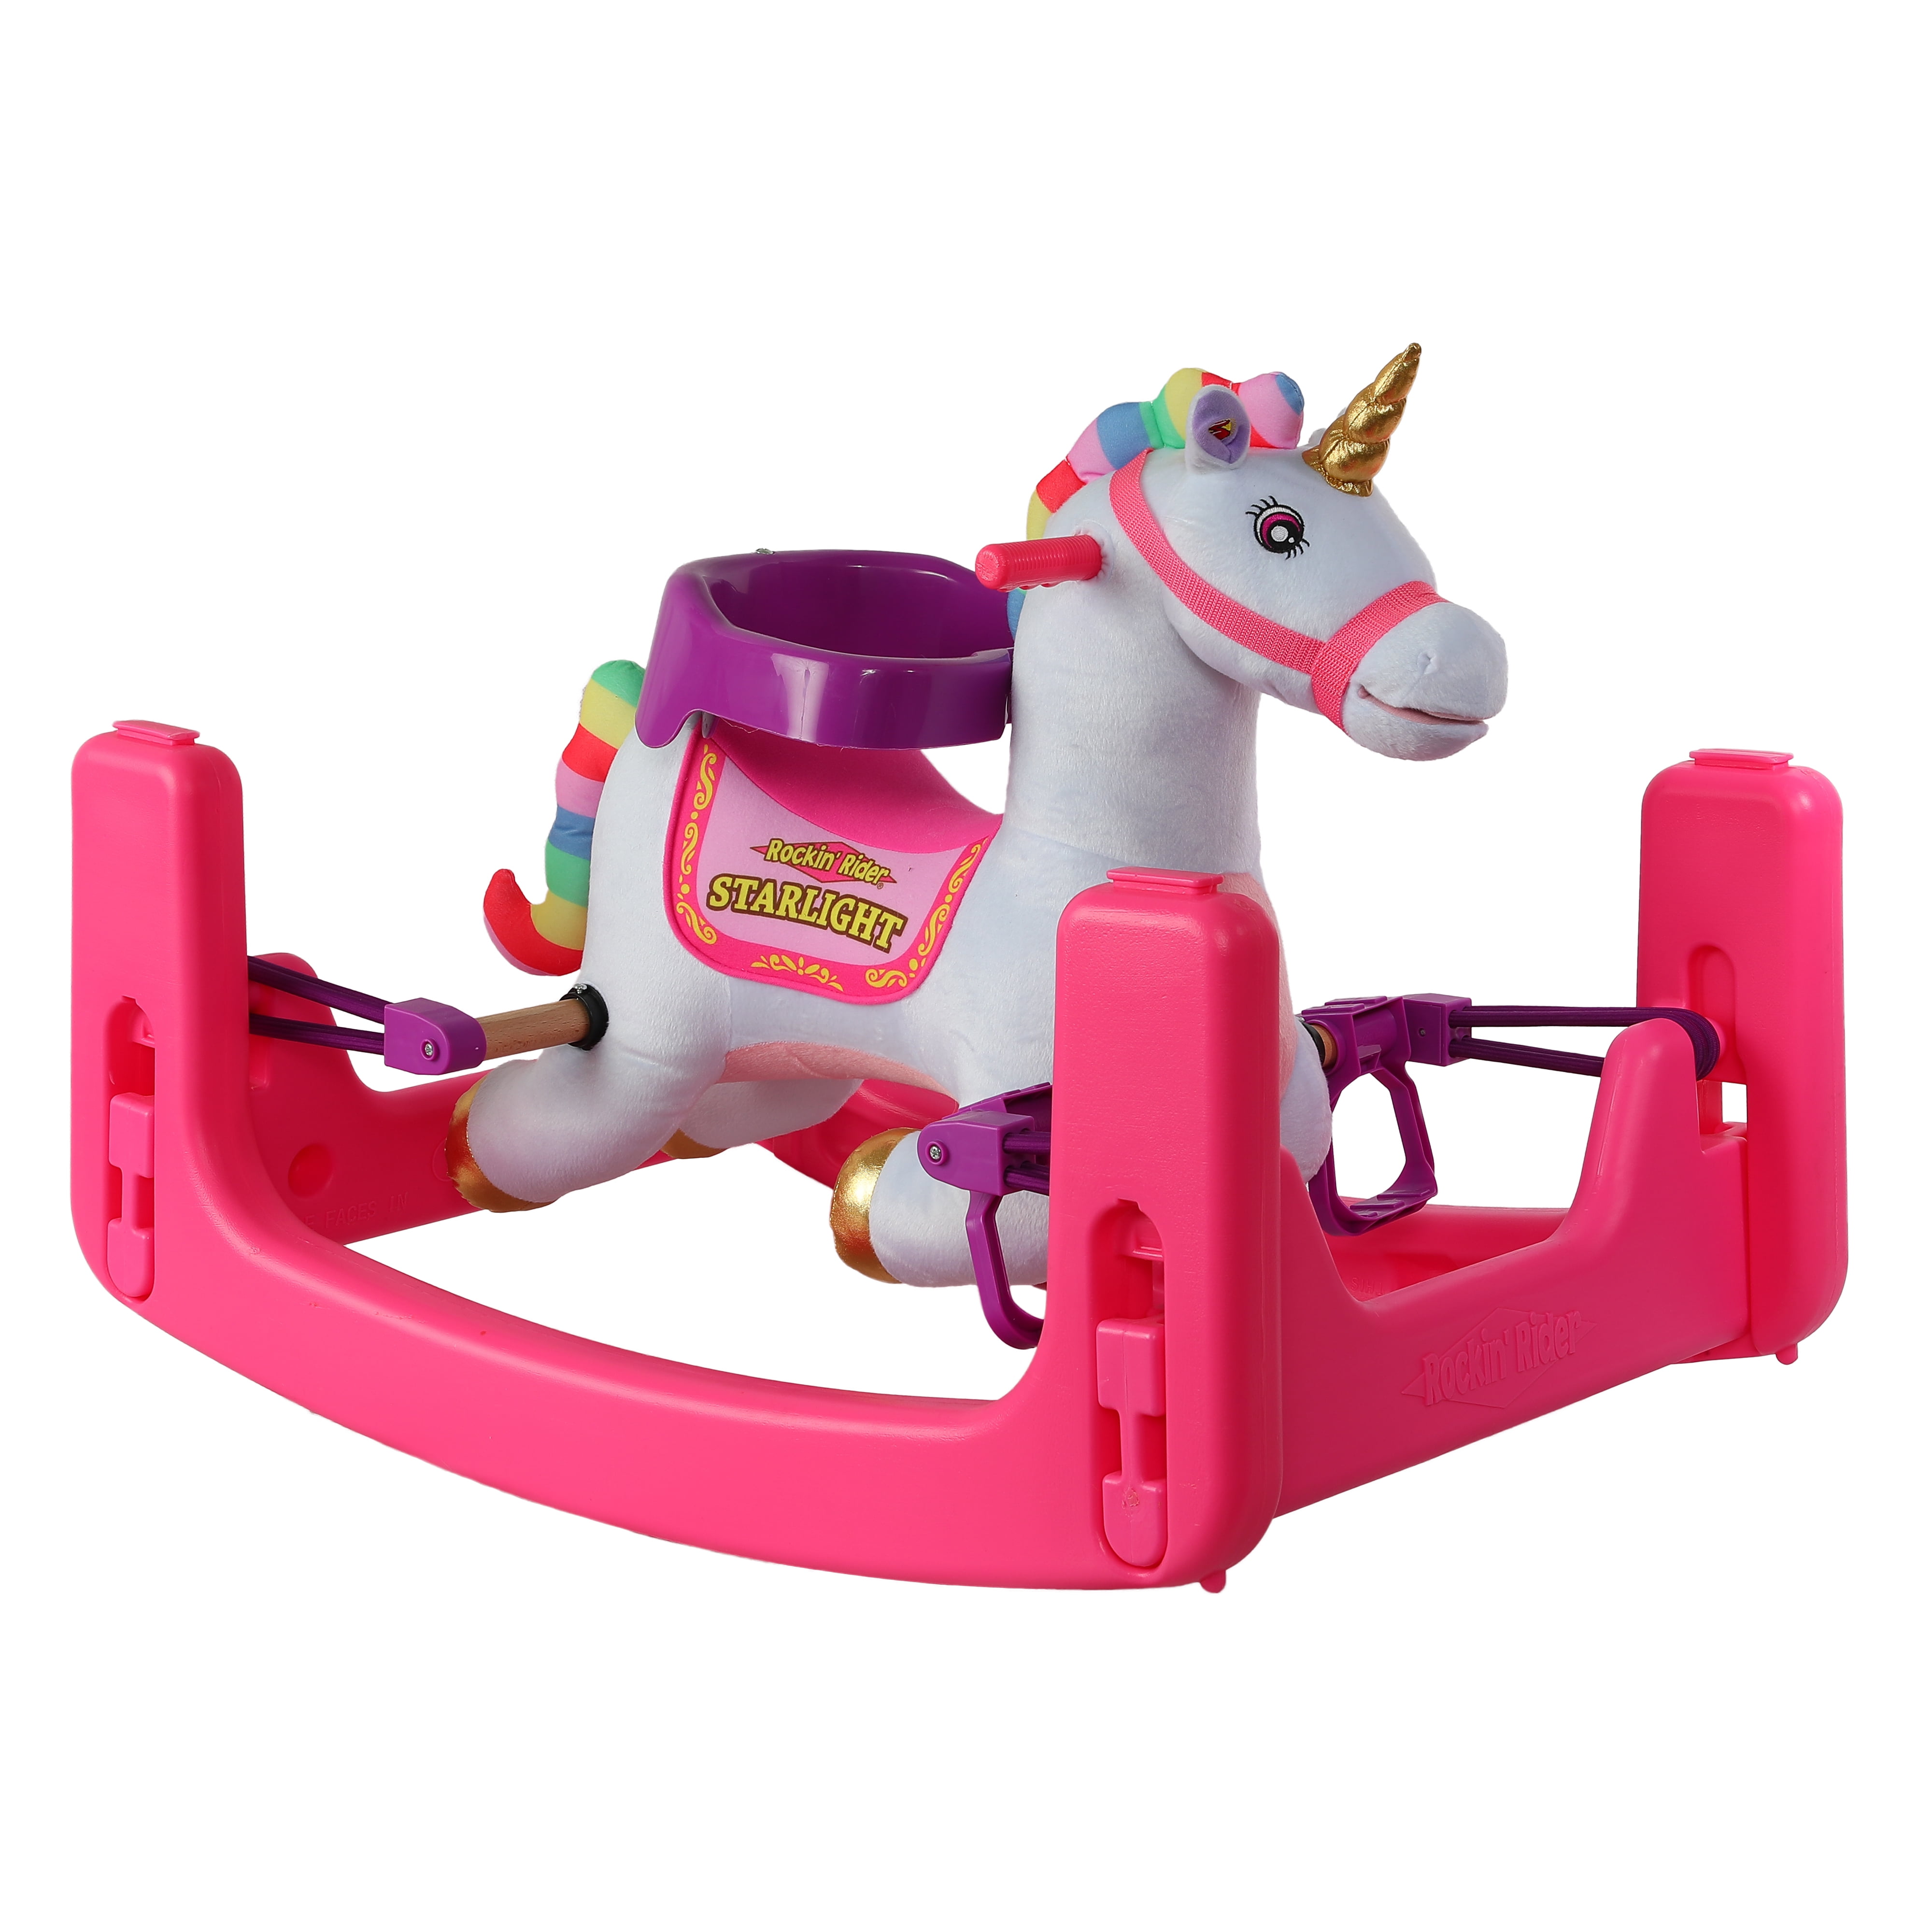 Ride On Toy Horse Theme Toddler Boys Girls Walking Troller w/ Wheels and Sound 